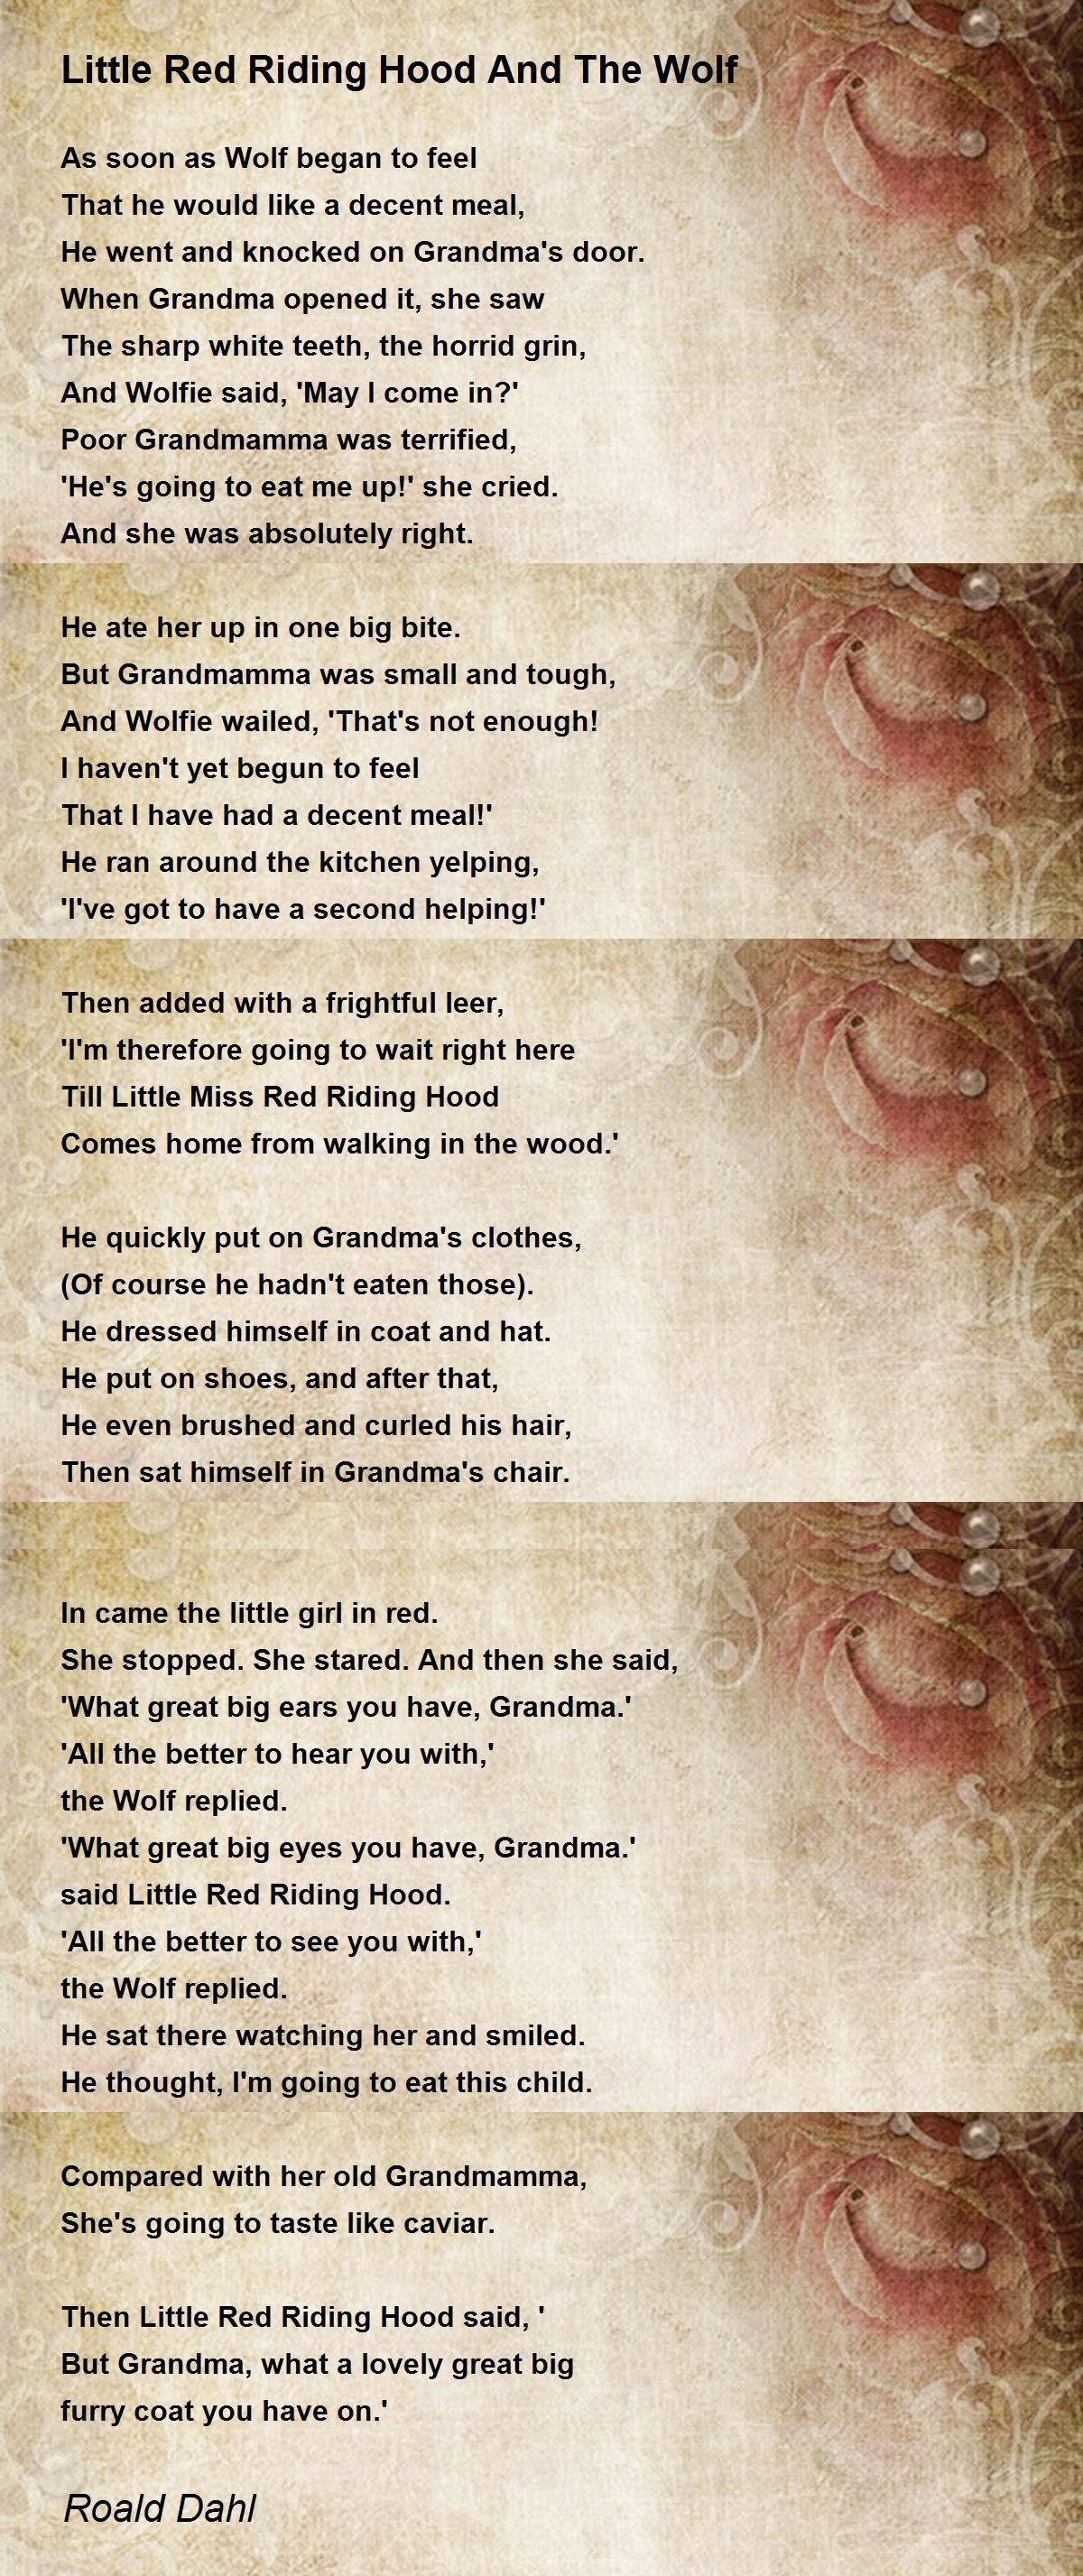 Little Red Hood The - Little Red Riding Hood And The Wolf Poem by Roald